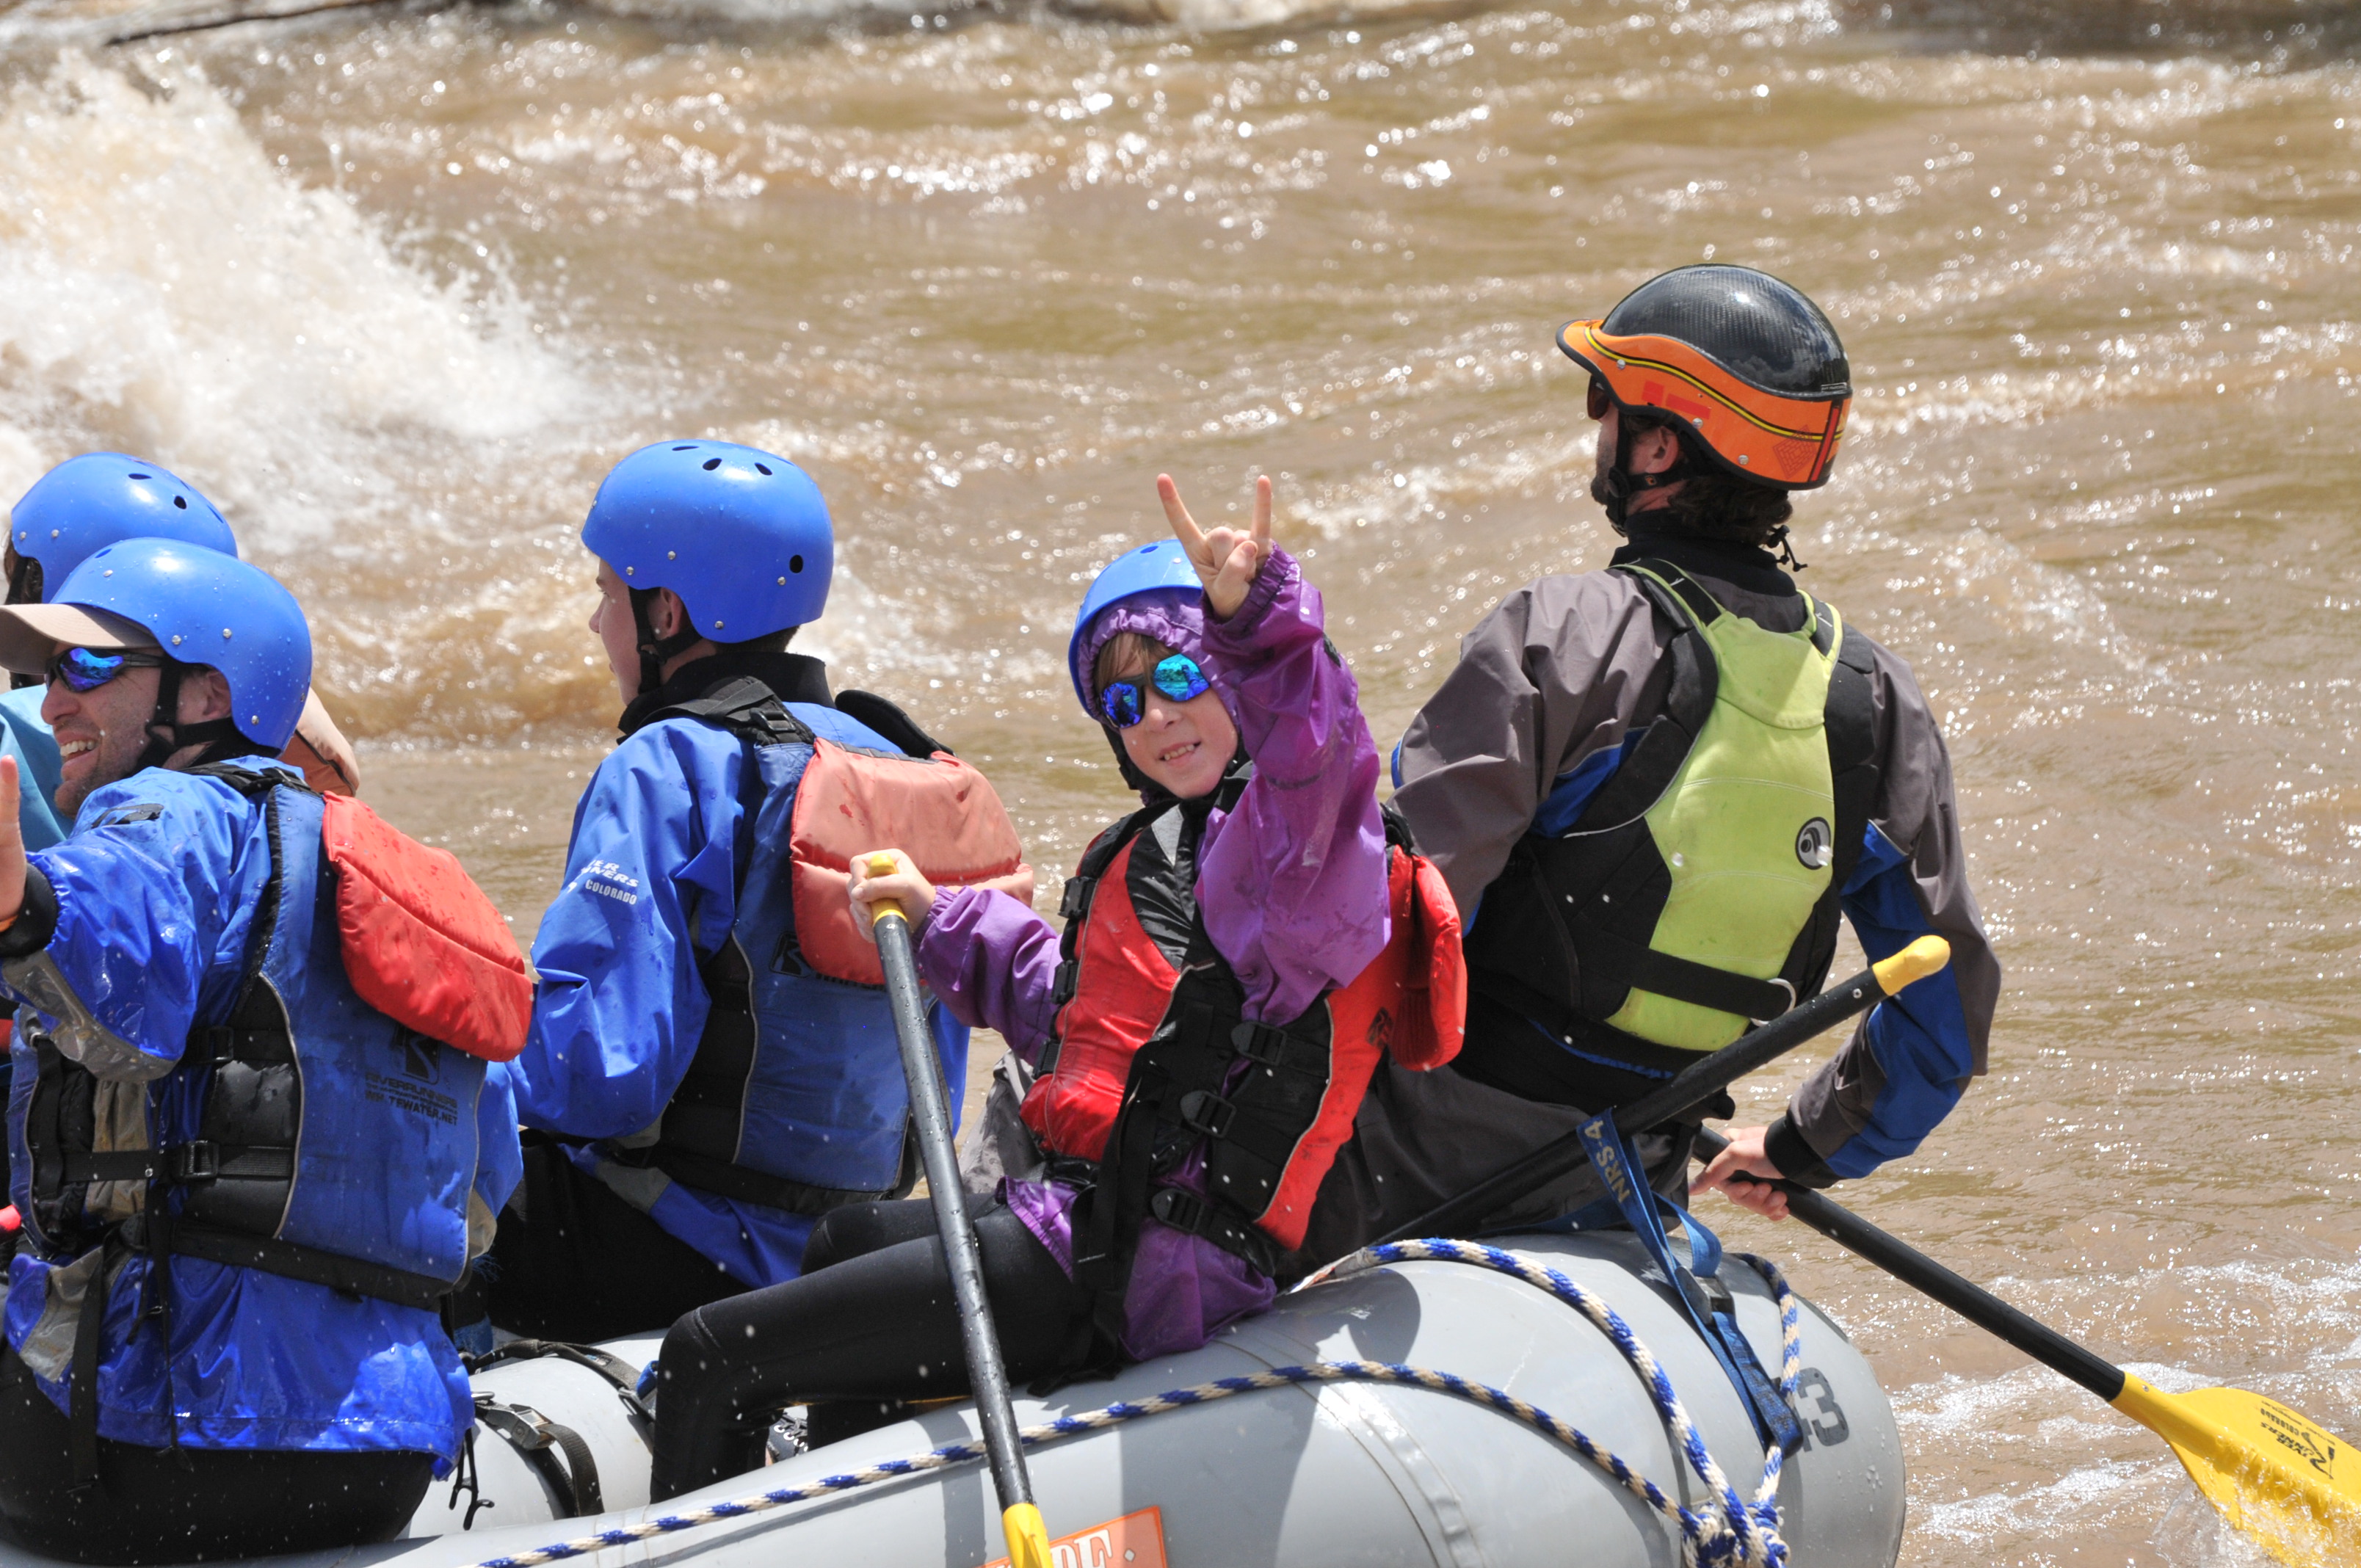 Beginner rafting trips are open at high water.